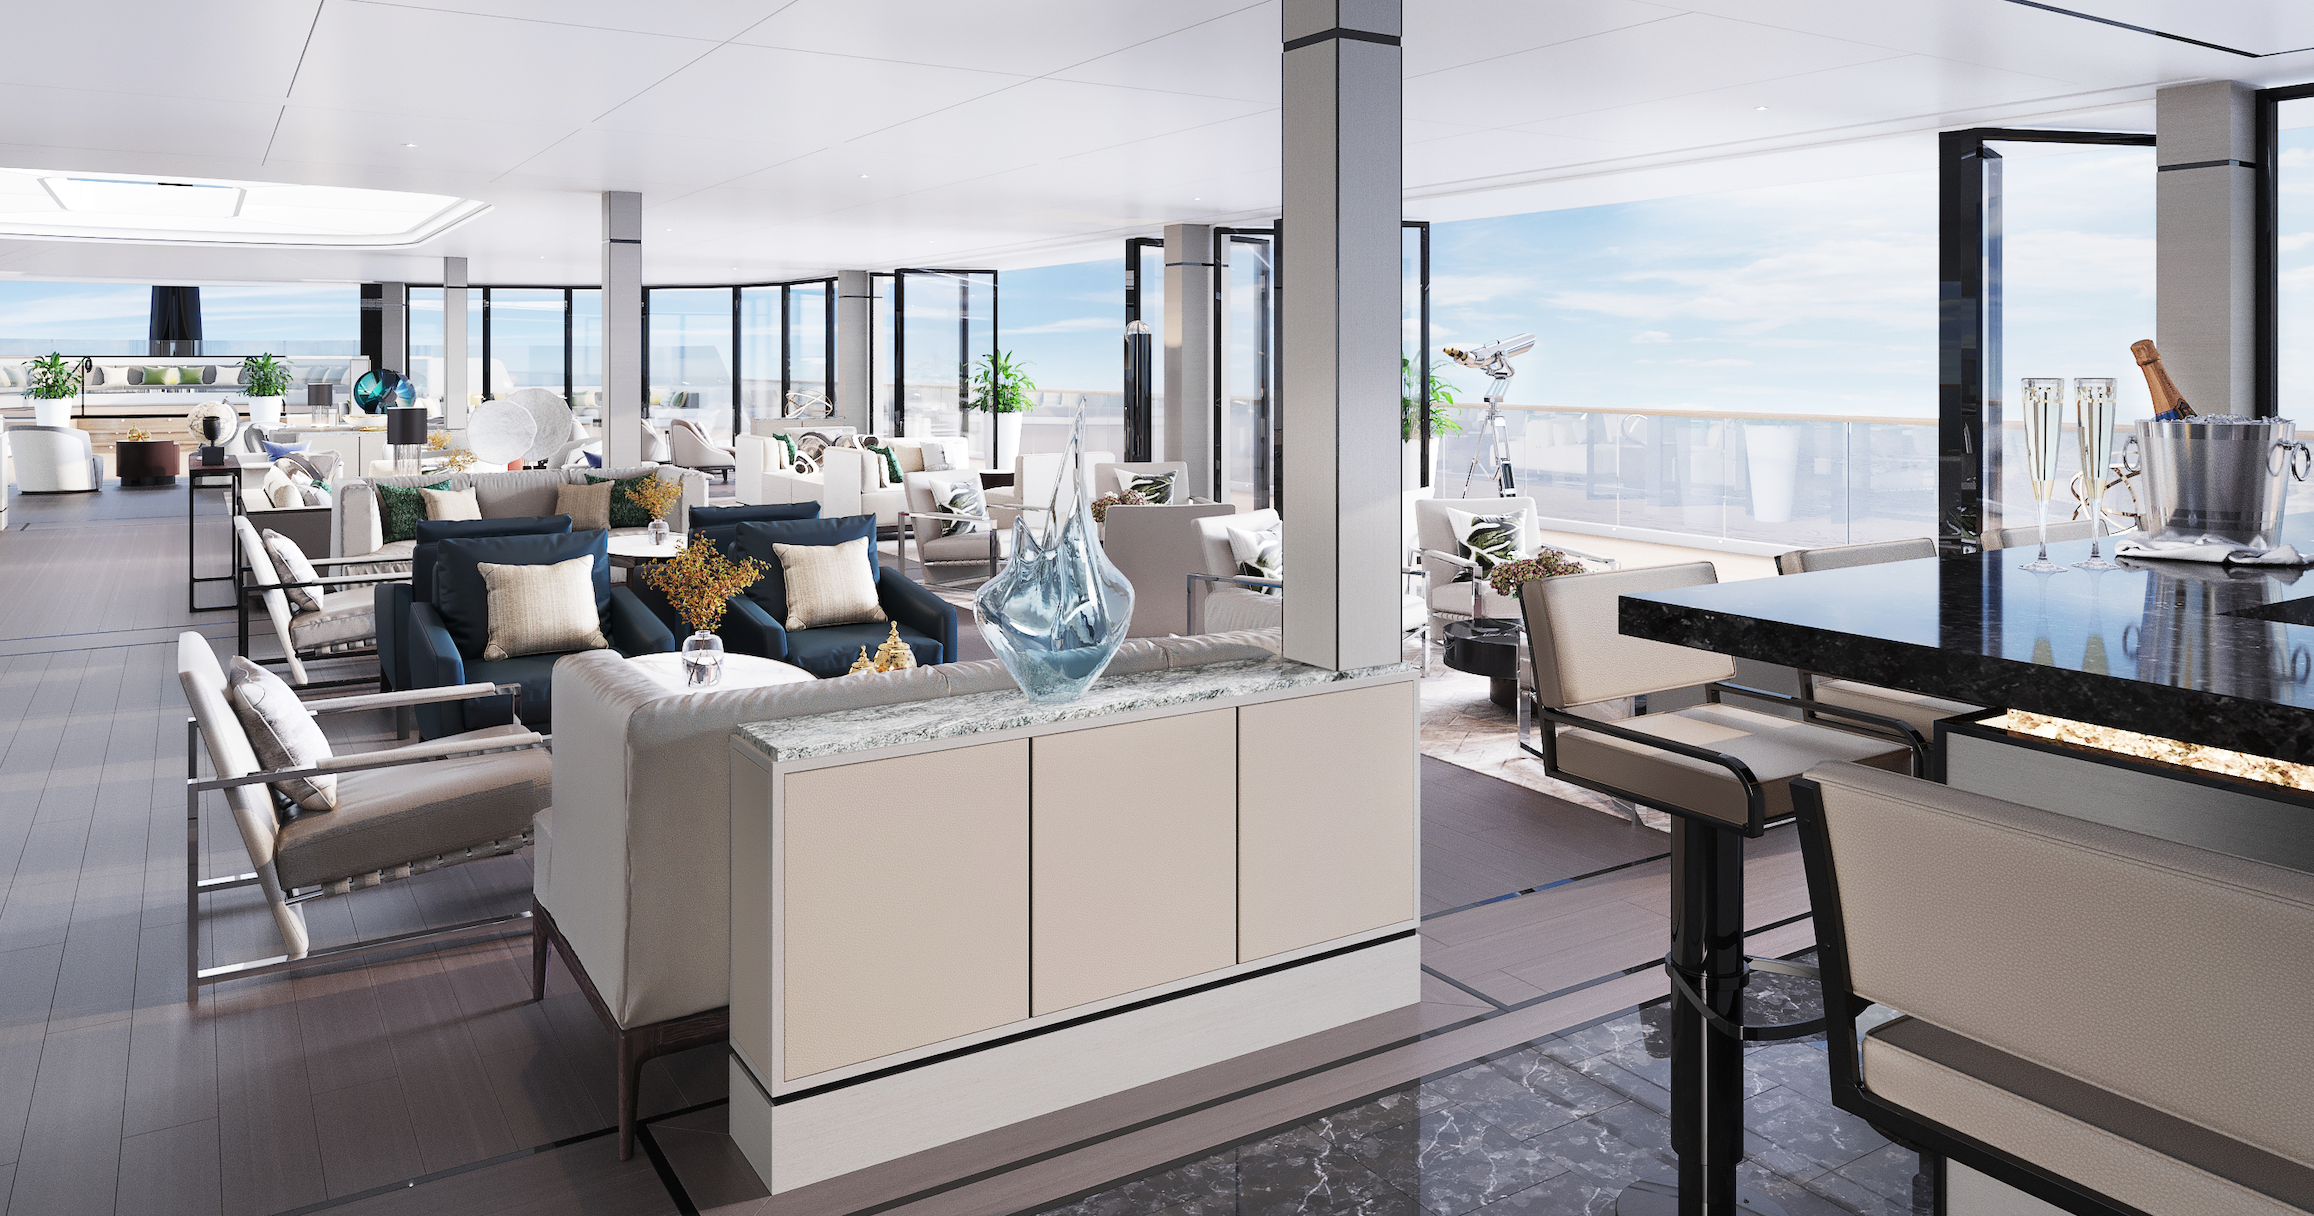   Rendering of the Observation Lounge (photo credit: Ritz-Carlton Yacht Collection)  